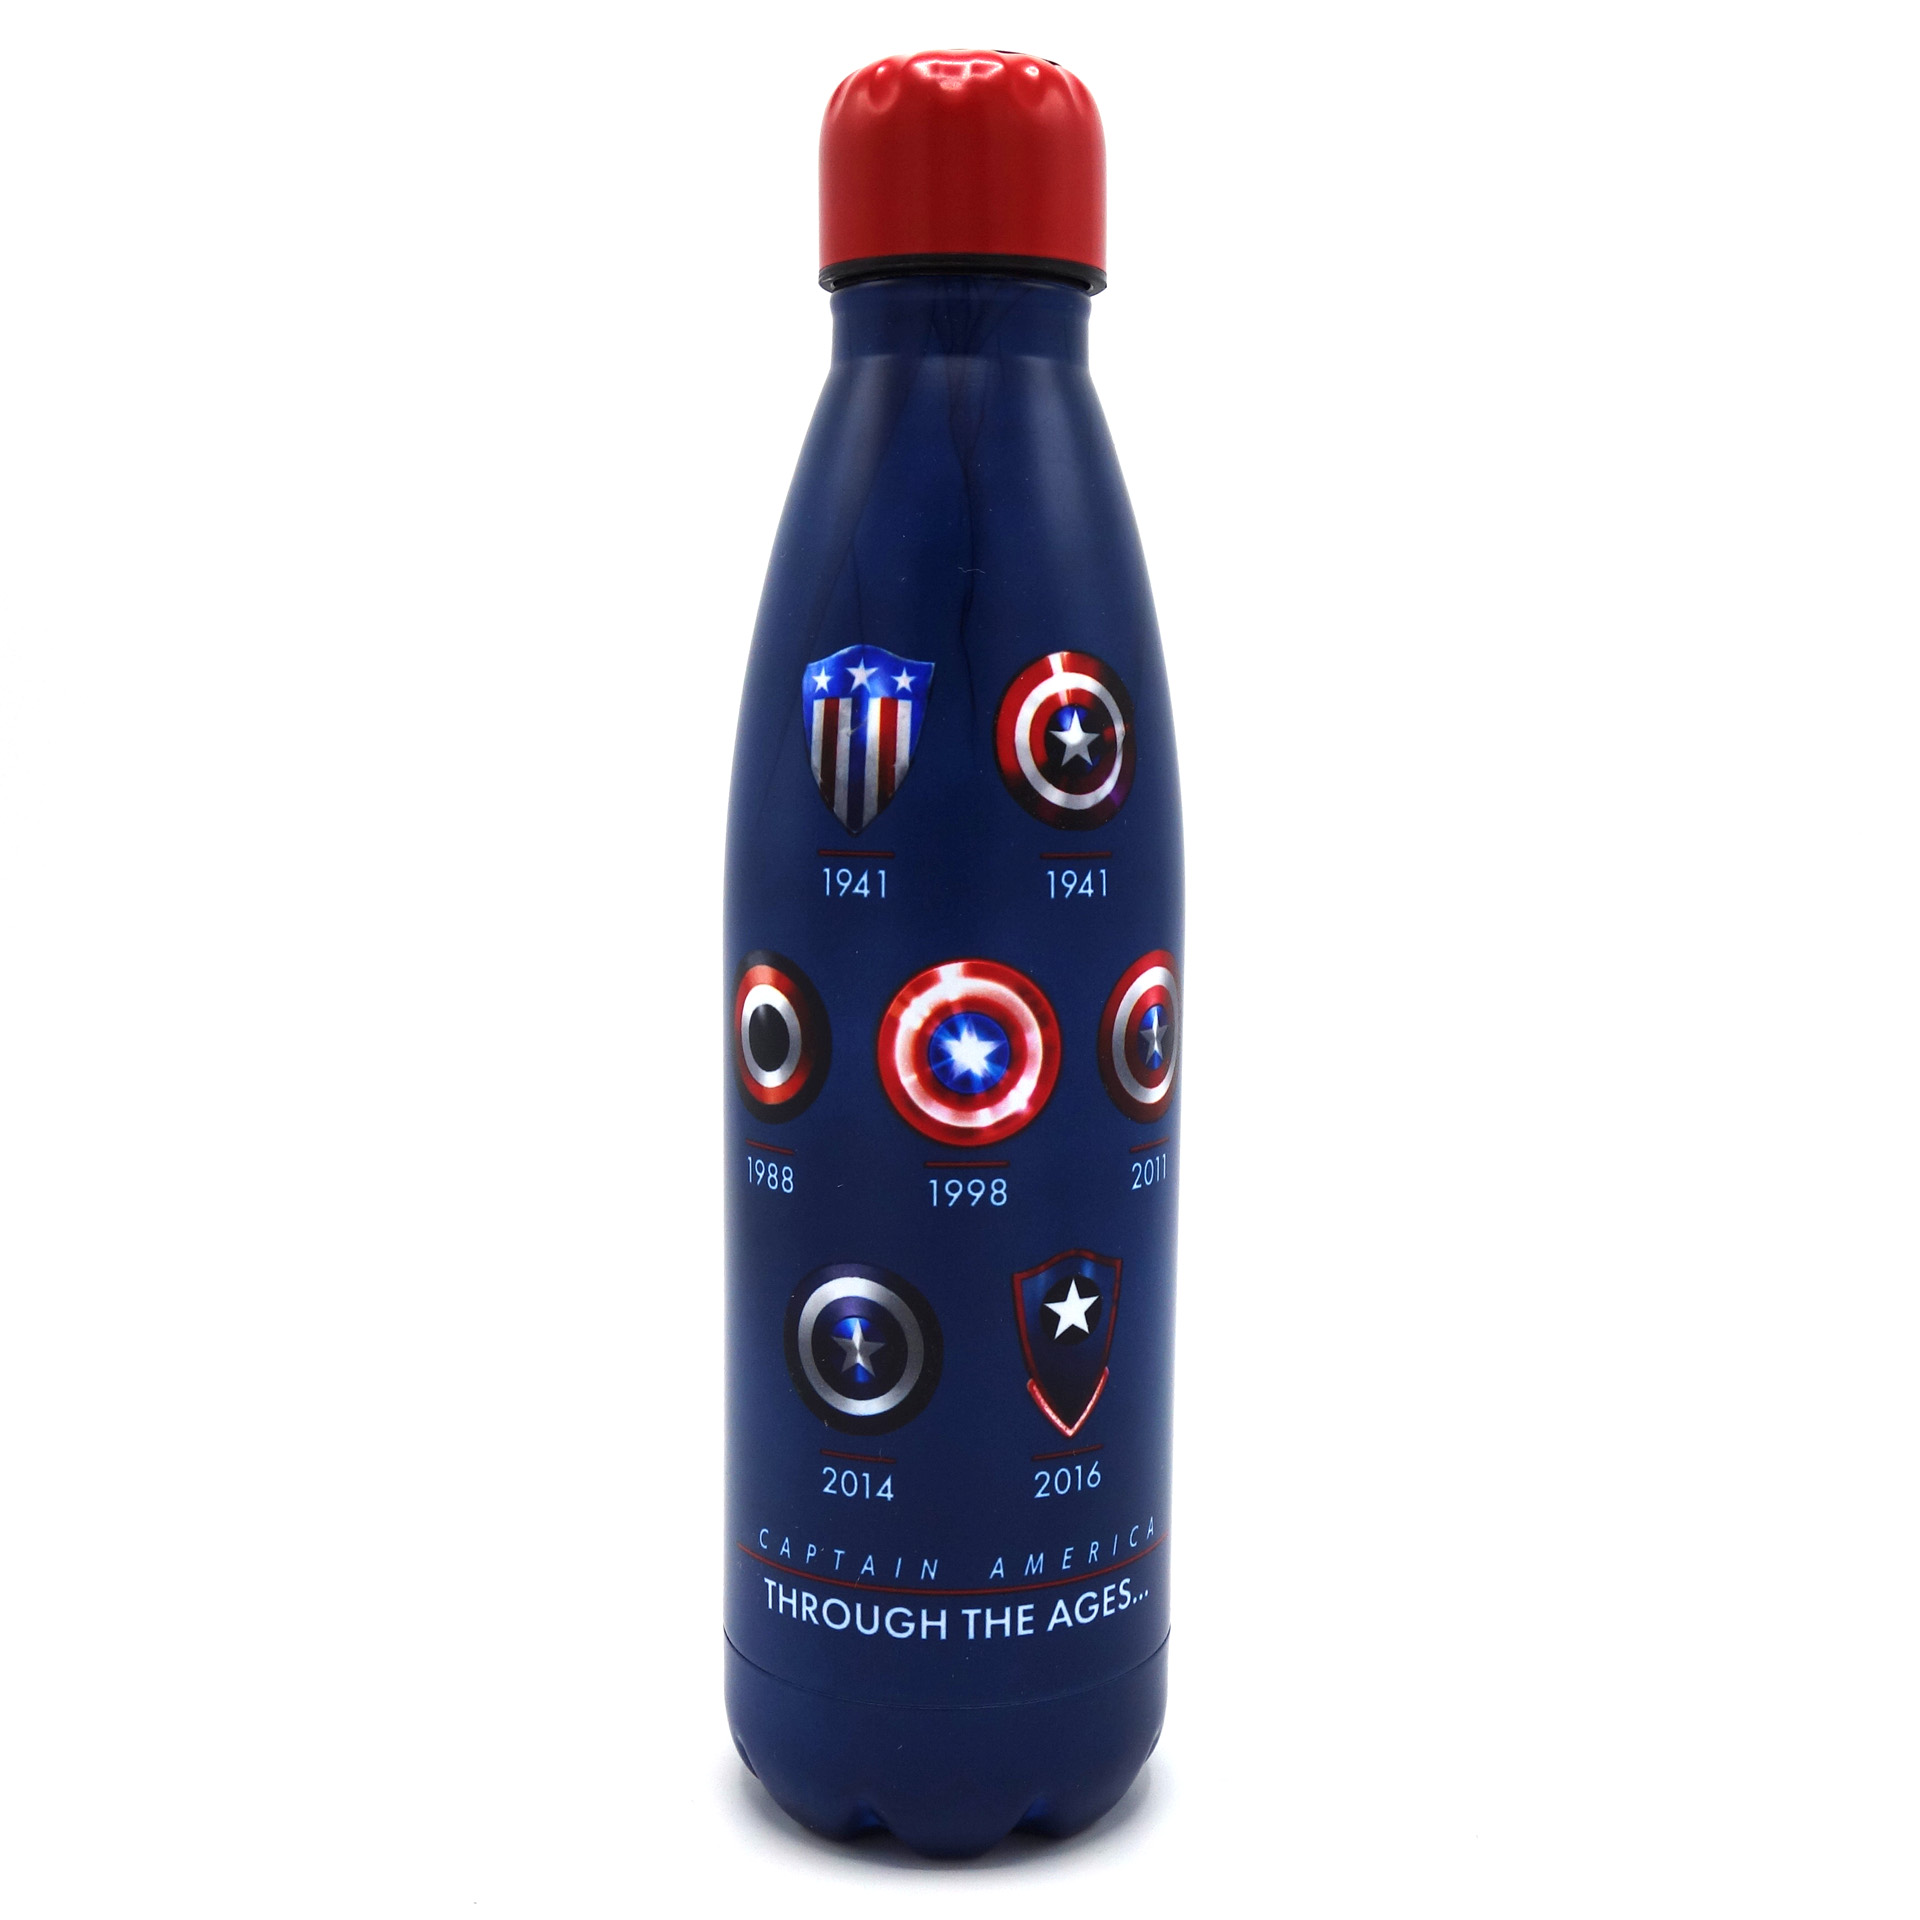 Captain America Trinkflasche Through The Ages.. Metallflasche